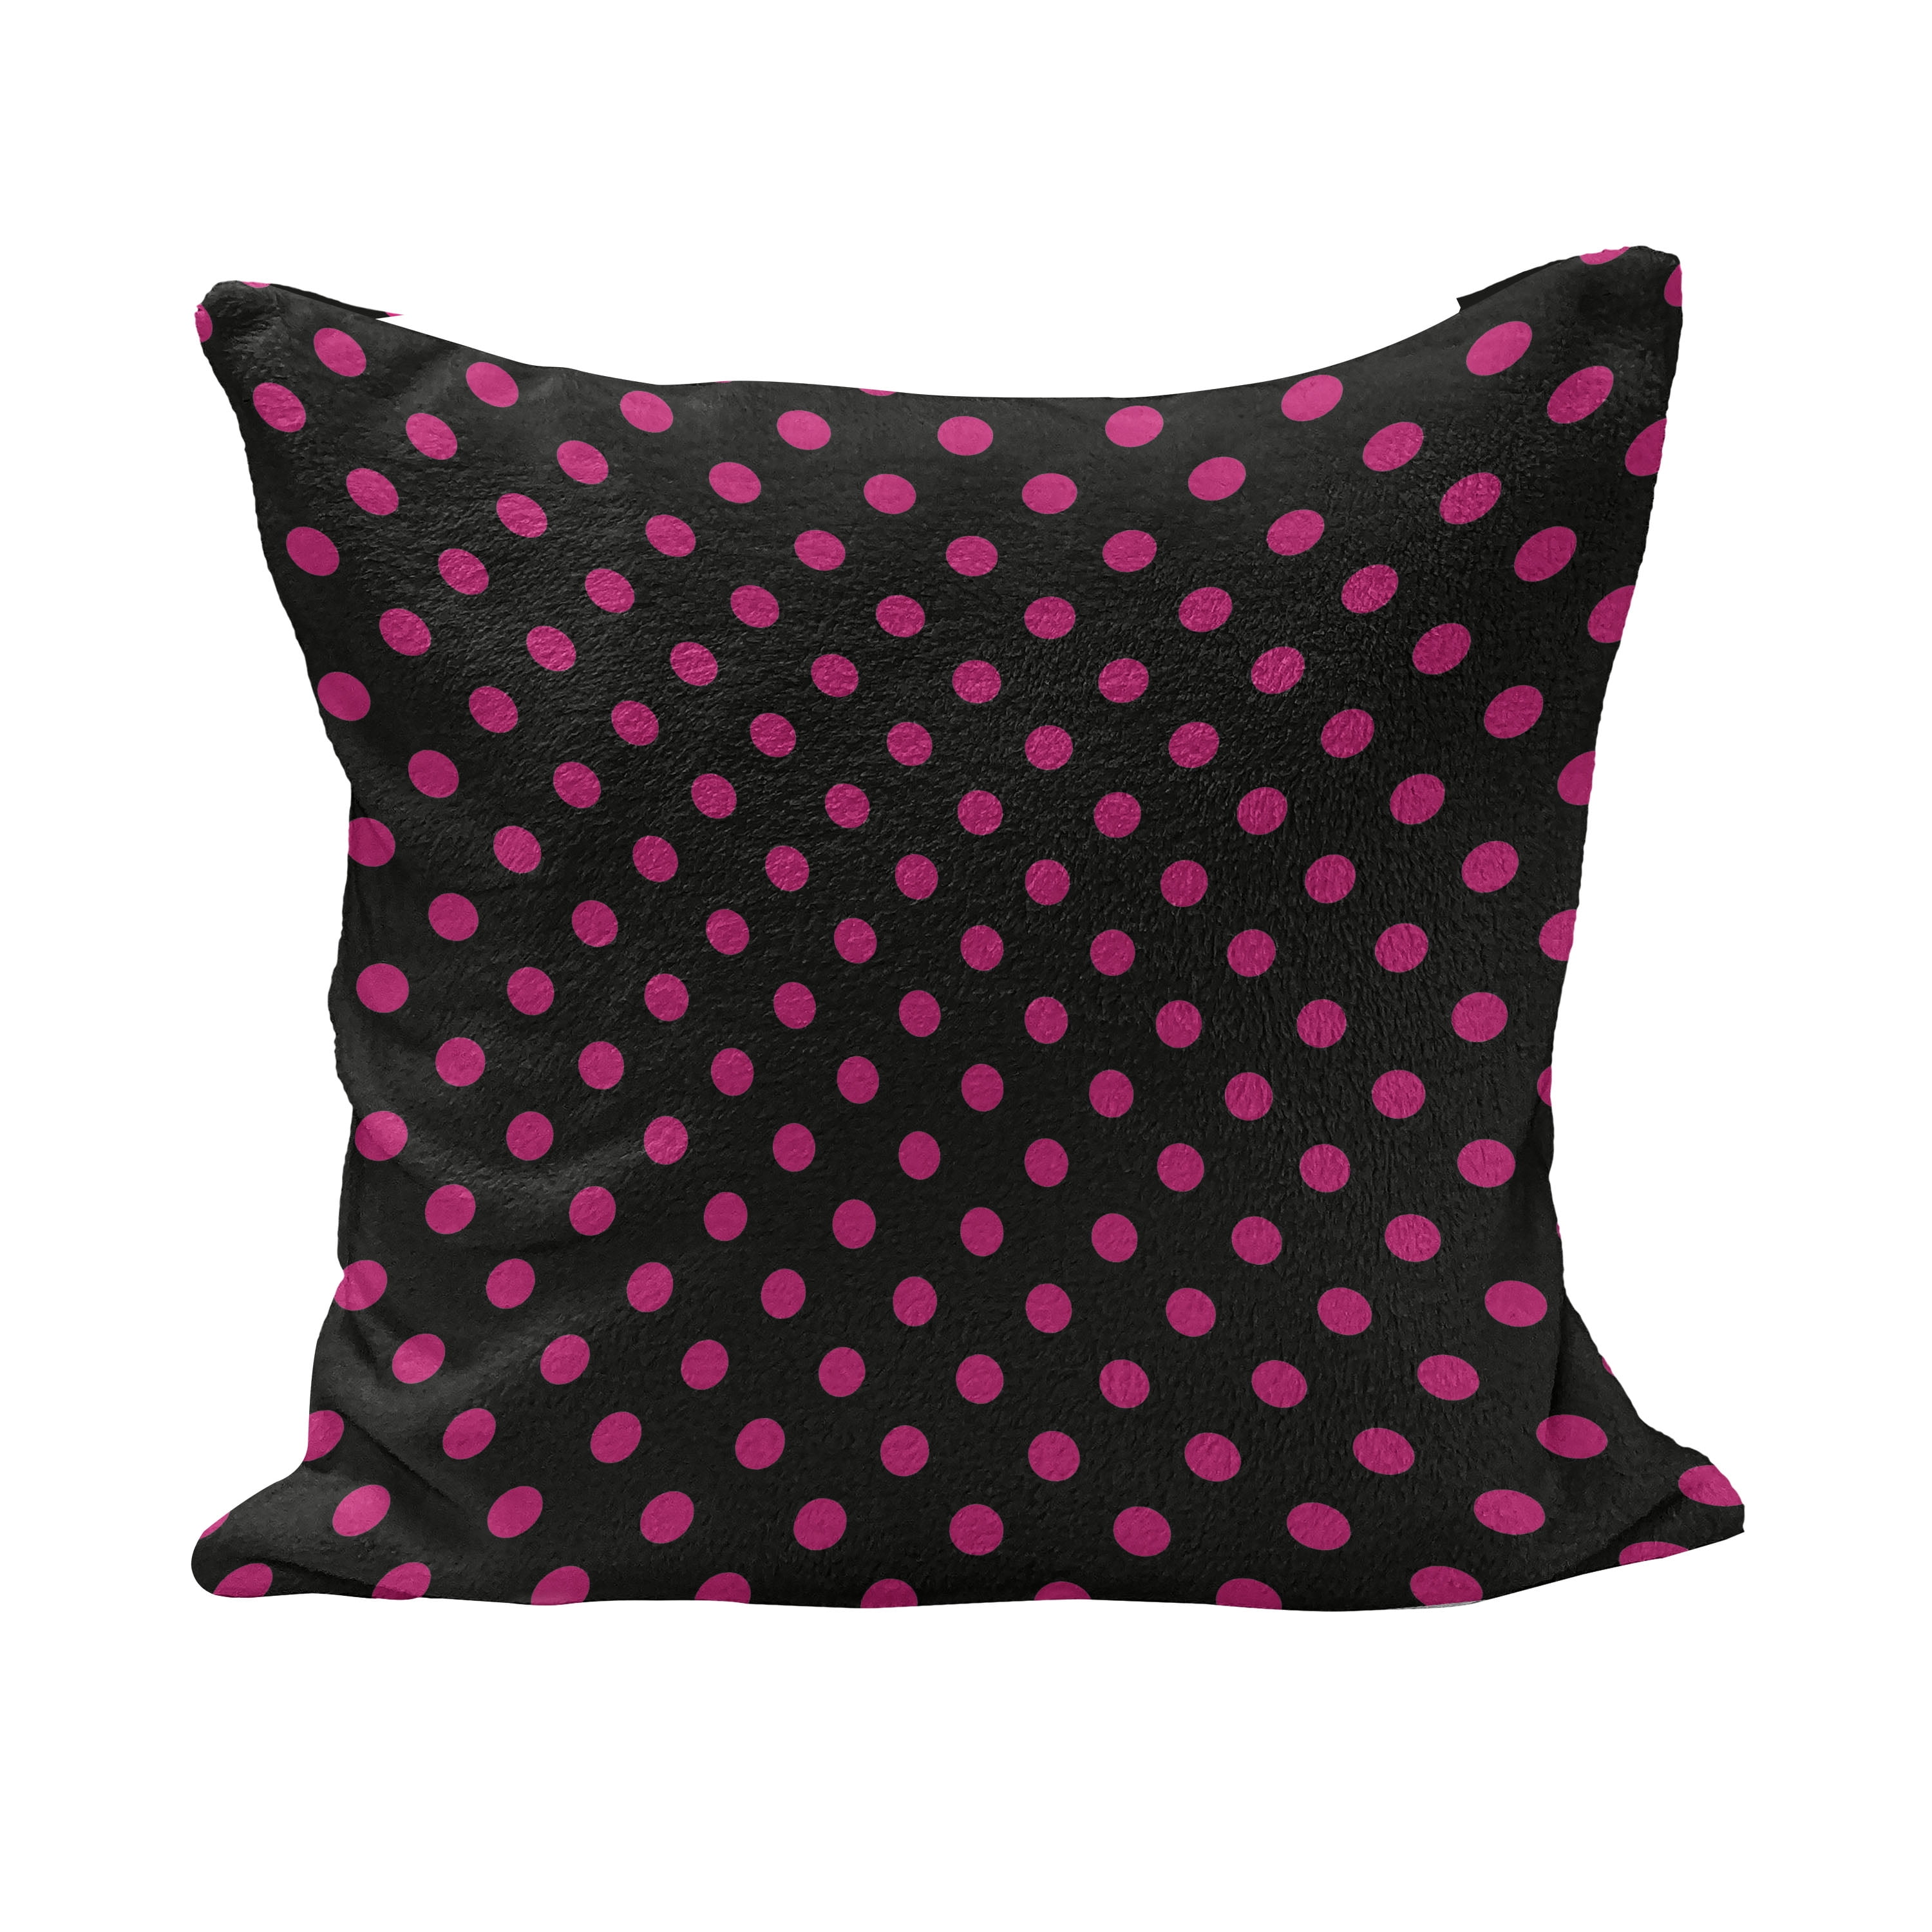 Cushion cover Floral floral raspberry pink 40 x 40 cm 50 x 50 cm with cotton corduroy fabric